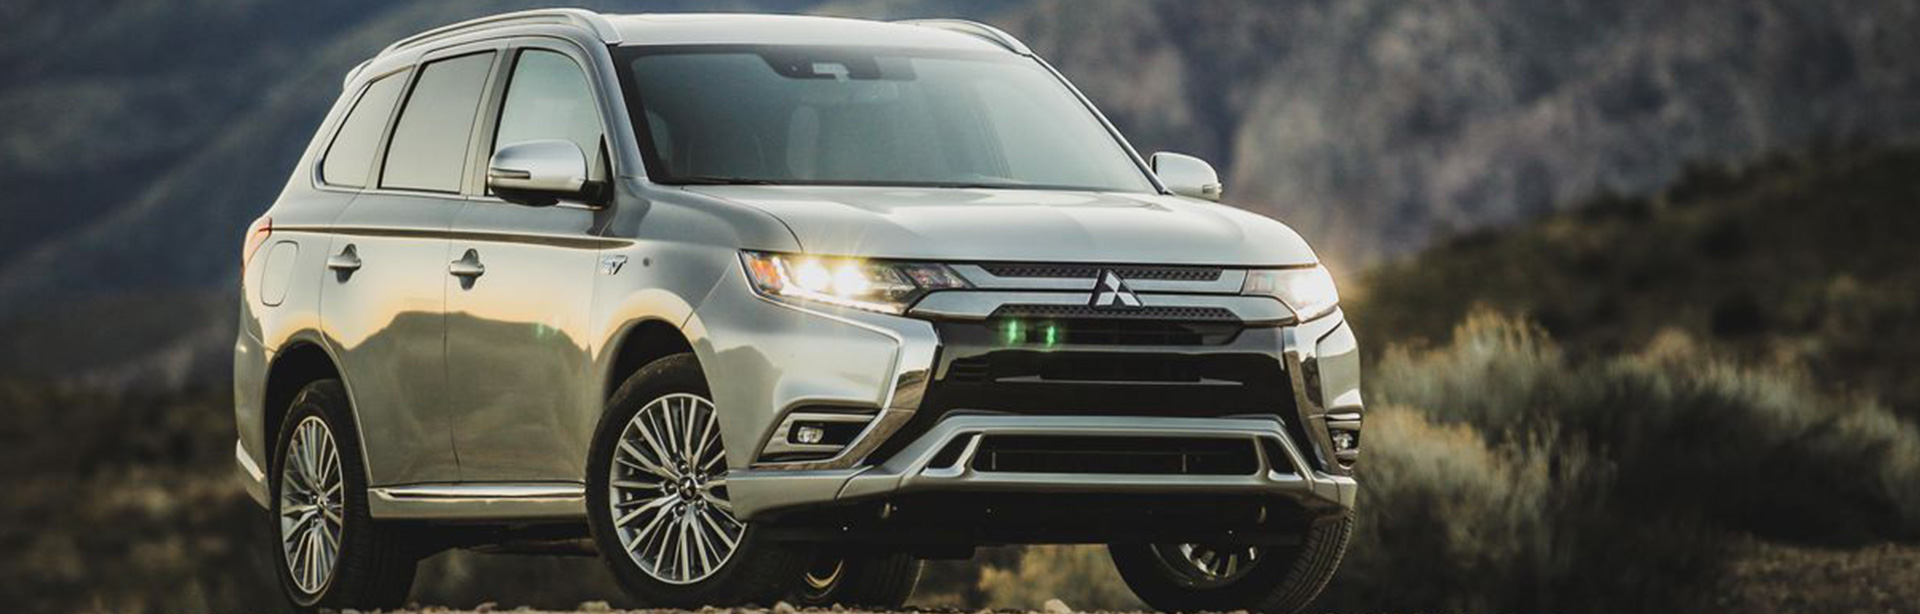 The 2020 Mitsubishi Outlander PHEV: Drive With Confidence in Longmont, CO